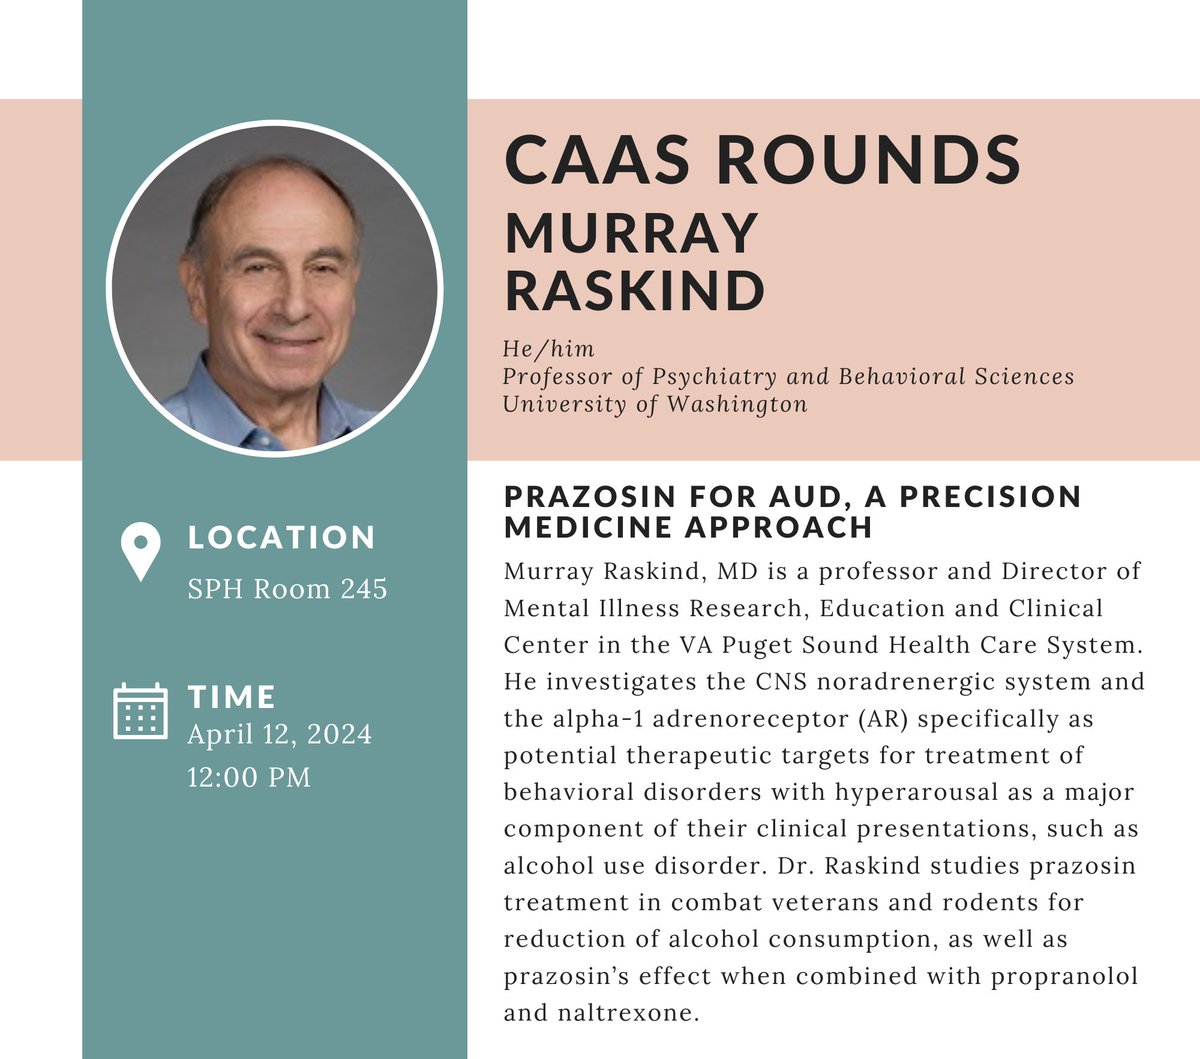 Please join us tomorrow (Friday, April 12th) at 12pm in SPH 245 for Dr. Murray Raskind (he/him)'s CAAS Rounds talk 'Prazosin for AUD, a Precision Medicine Approach.' This event is in-person only. We hope to see you there!